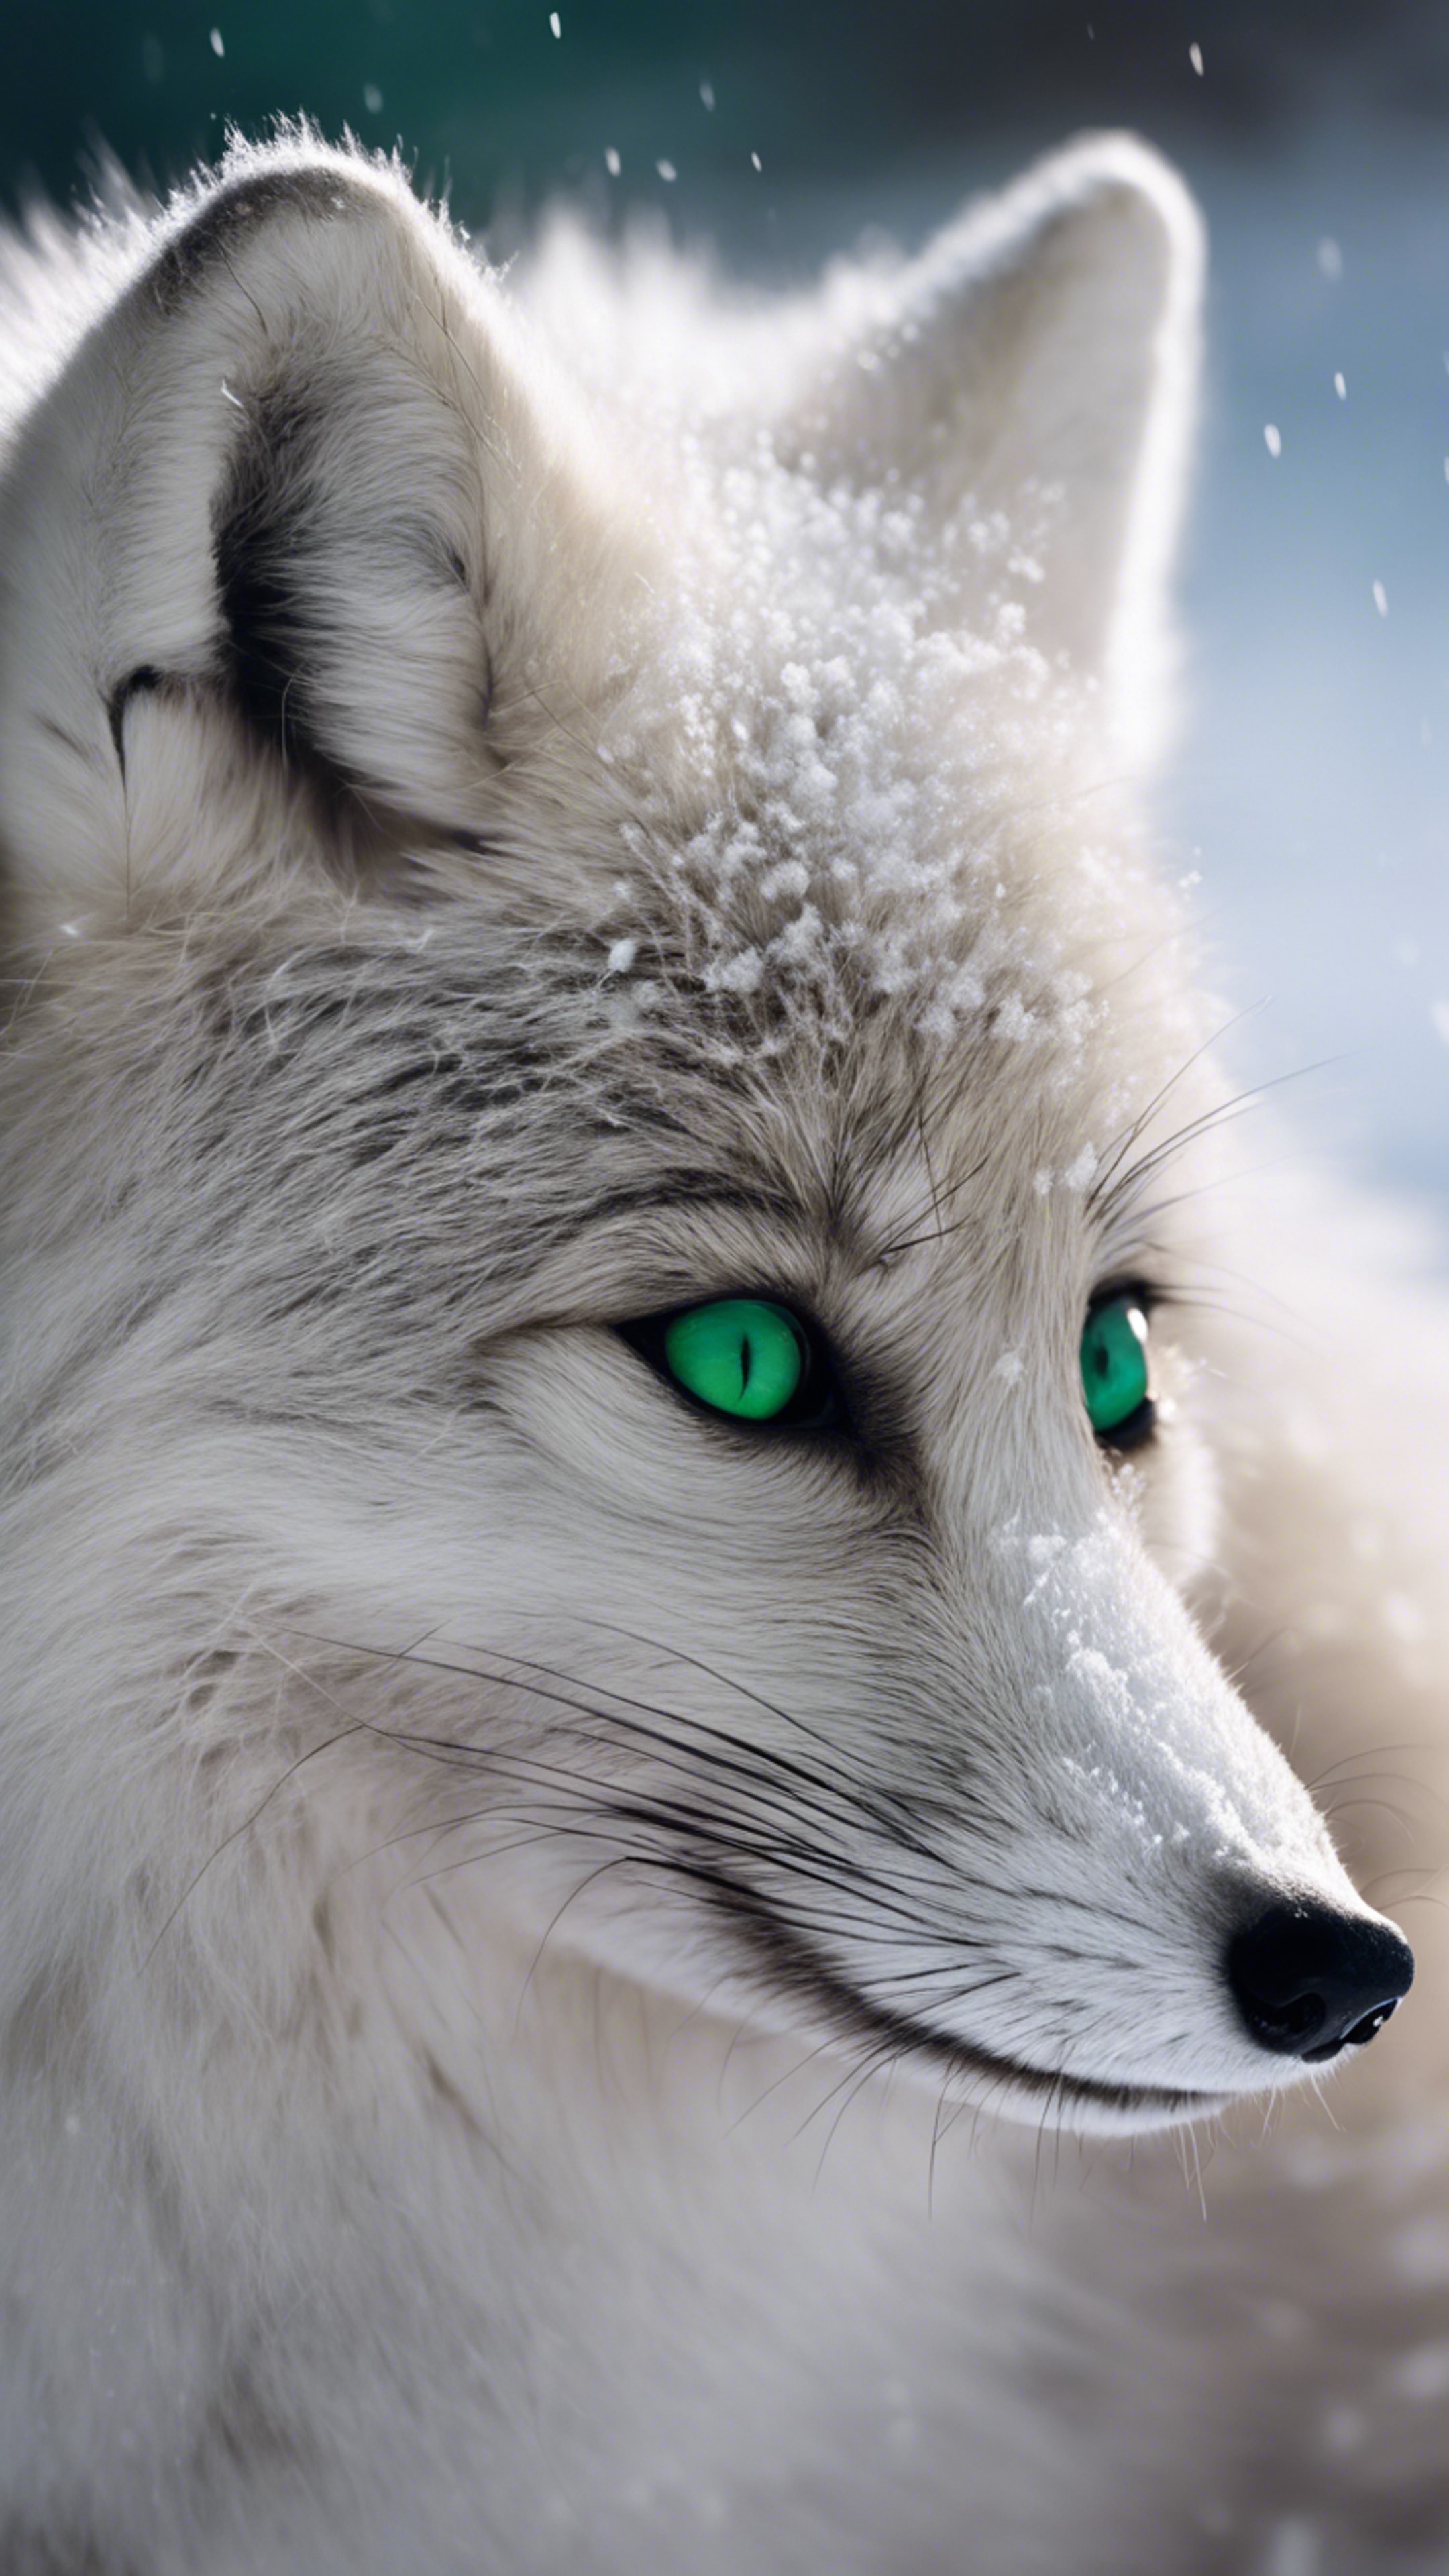 A fluffy, smoky gray arctic fox curled up in a snowy setting, its vivid green eyes staring directly at the viewer.壁紙[a0ededdcc5bf4726bdb5]